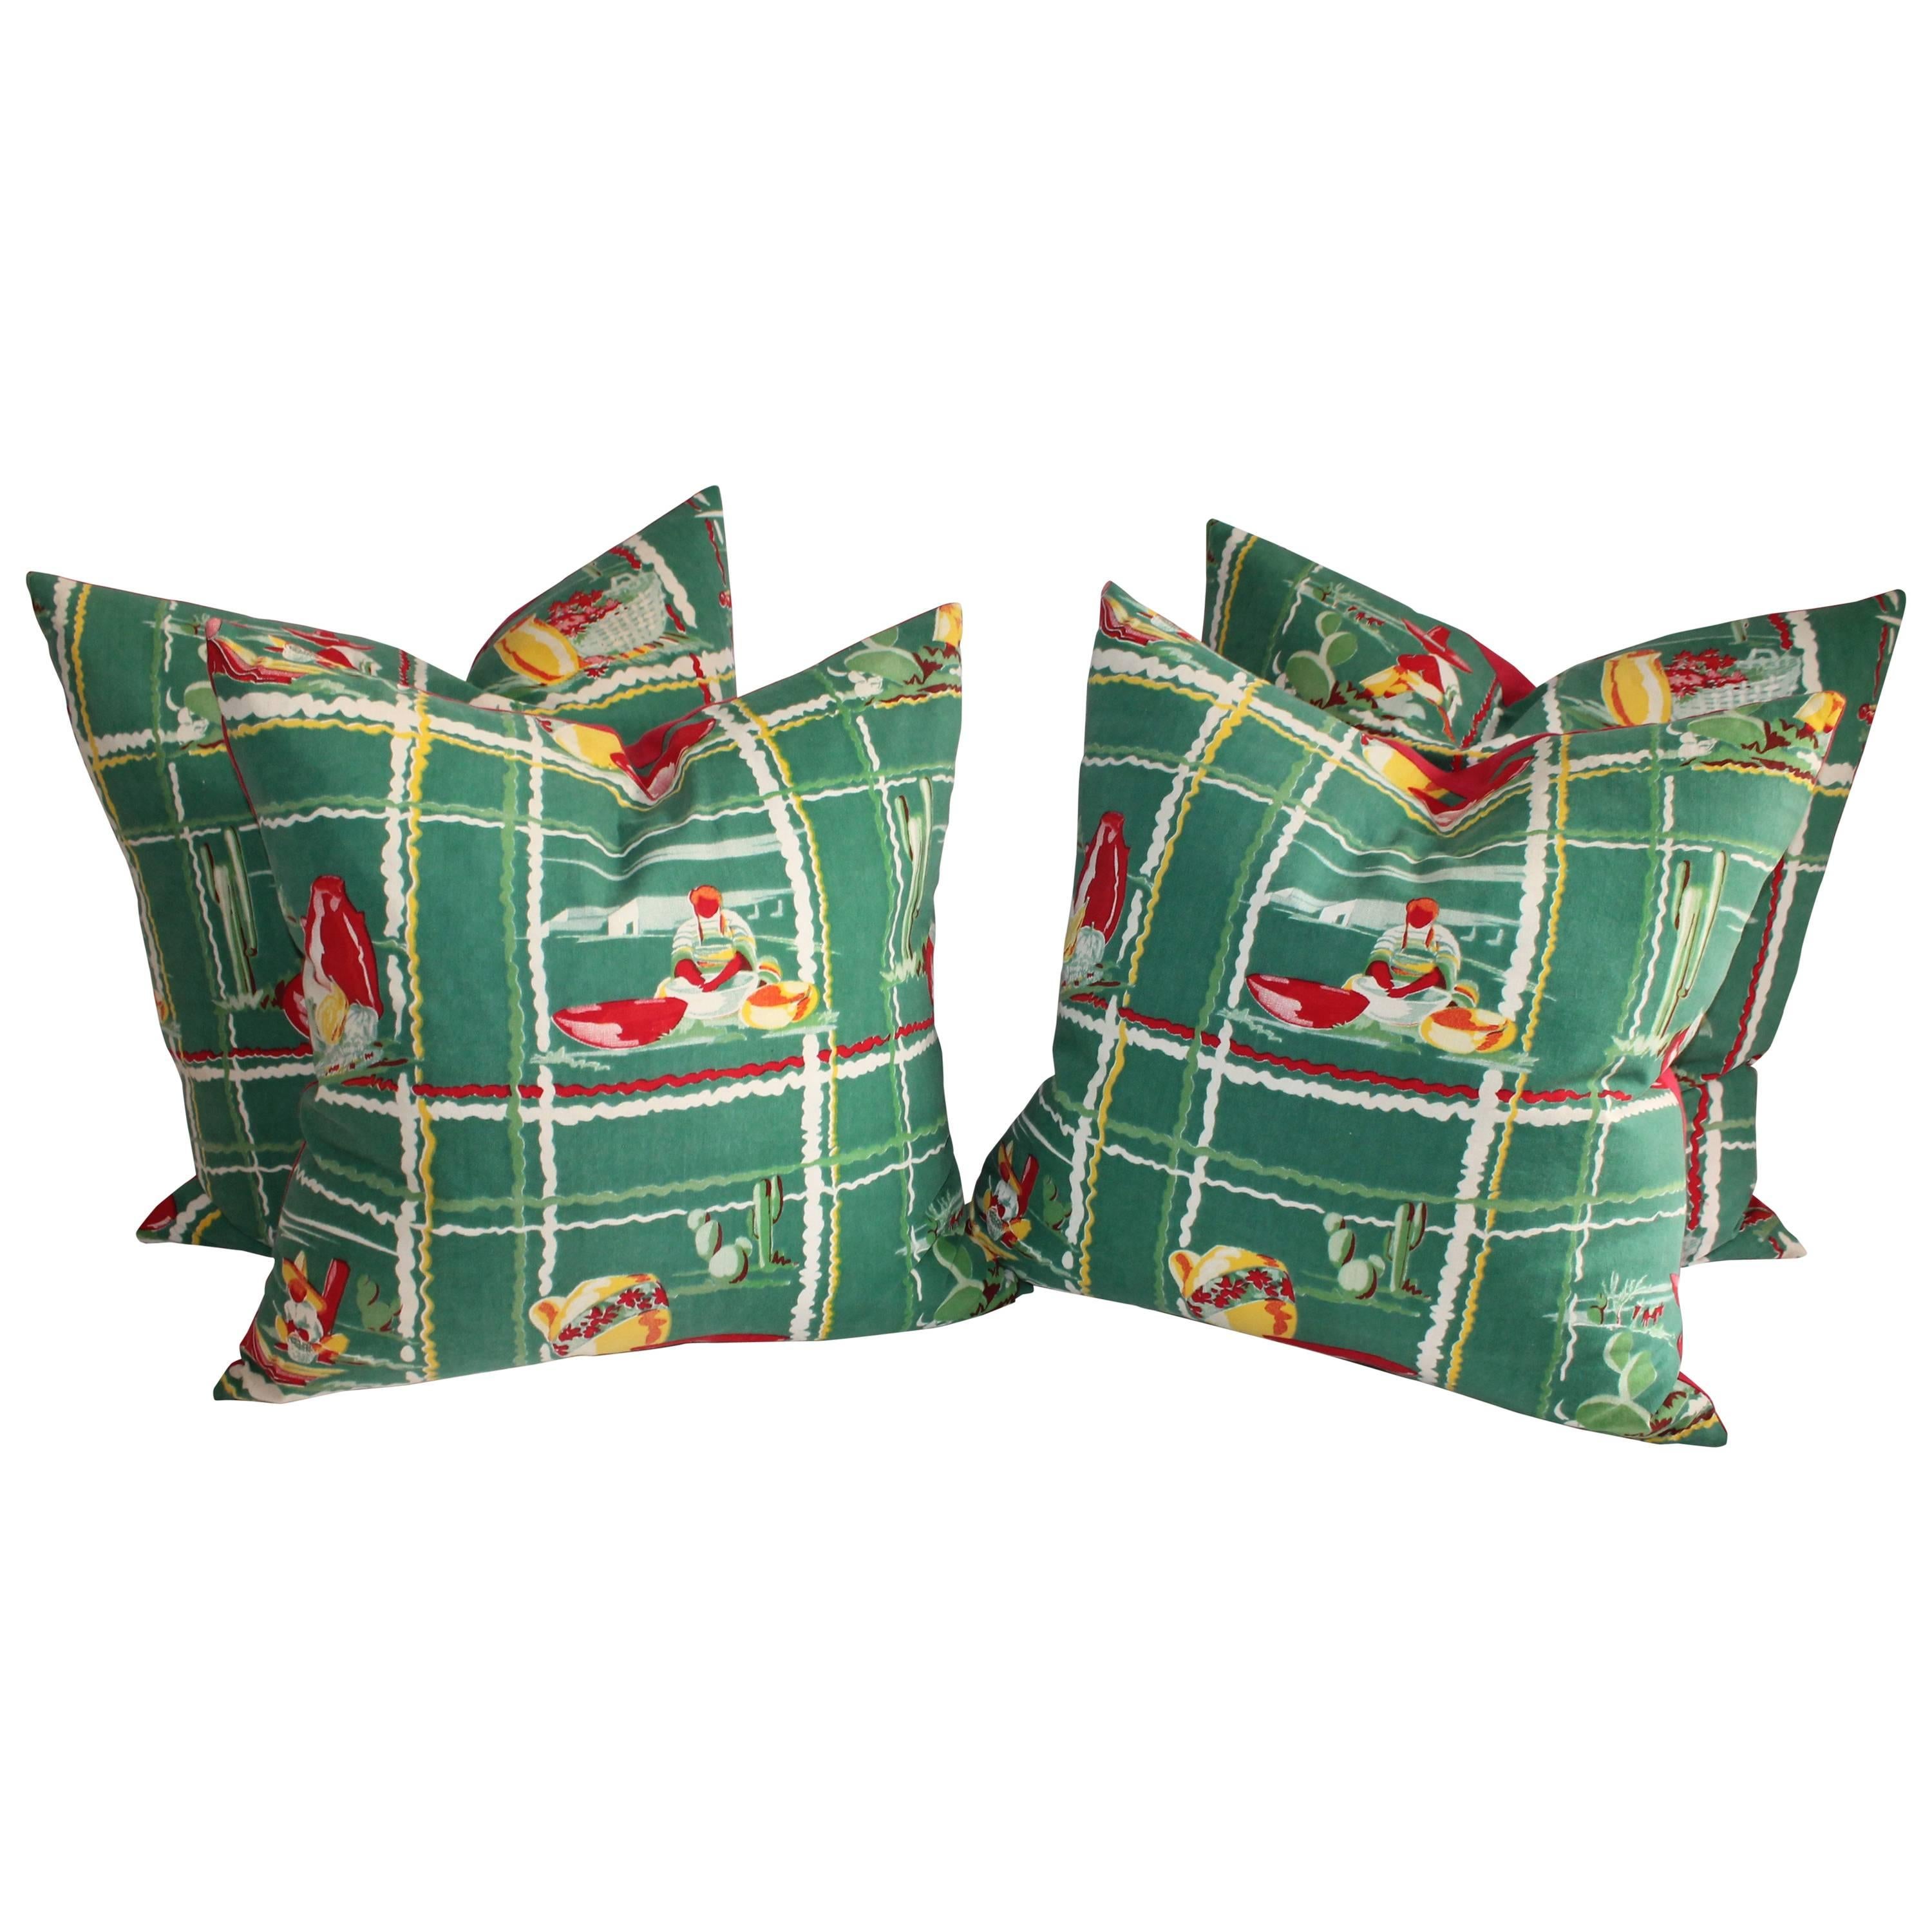 Tex, Mex Table Cloth Pillows / Collection of Four